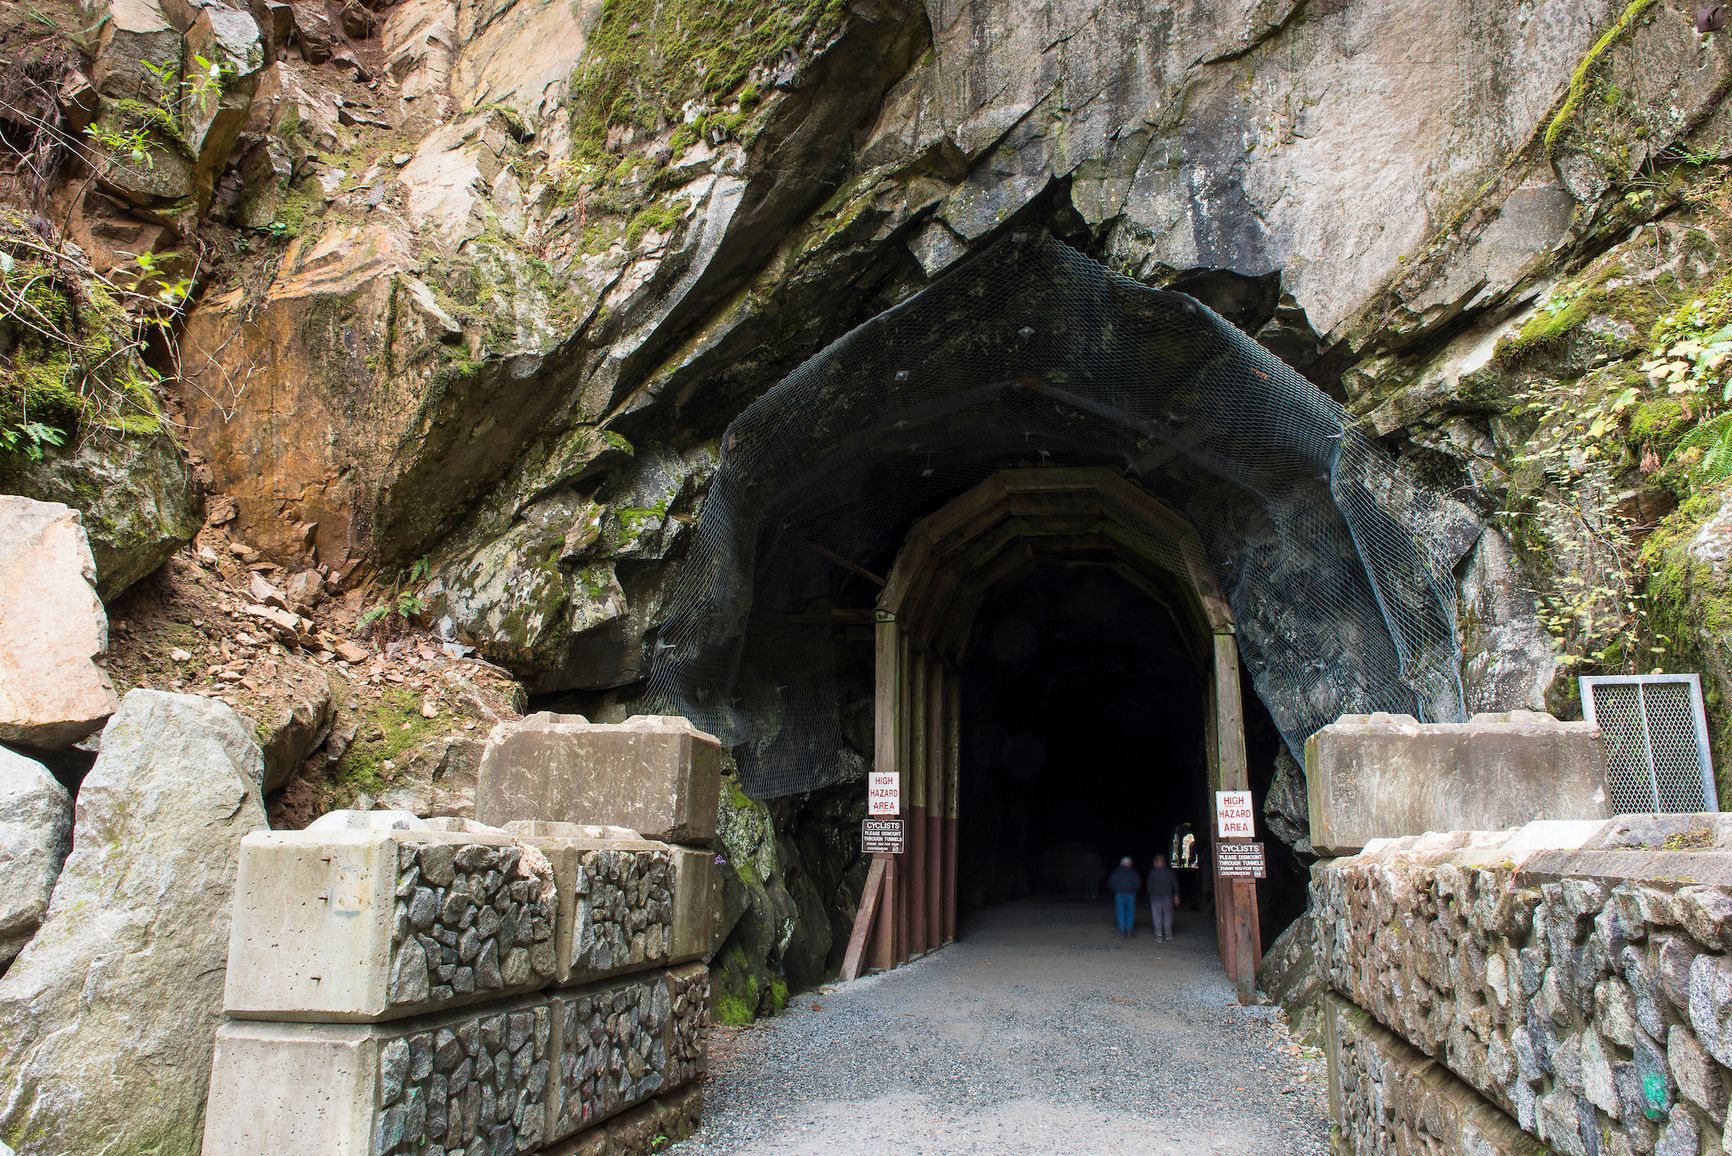 Othello tunnels are cut through solid granite and have interior supports of concrete and wood. Constructed in 1914 by the Canadian Pacific Railway, they became part of the Coquihalla Canyon Trail trail system in 1986.